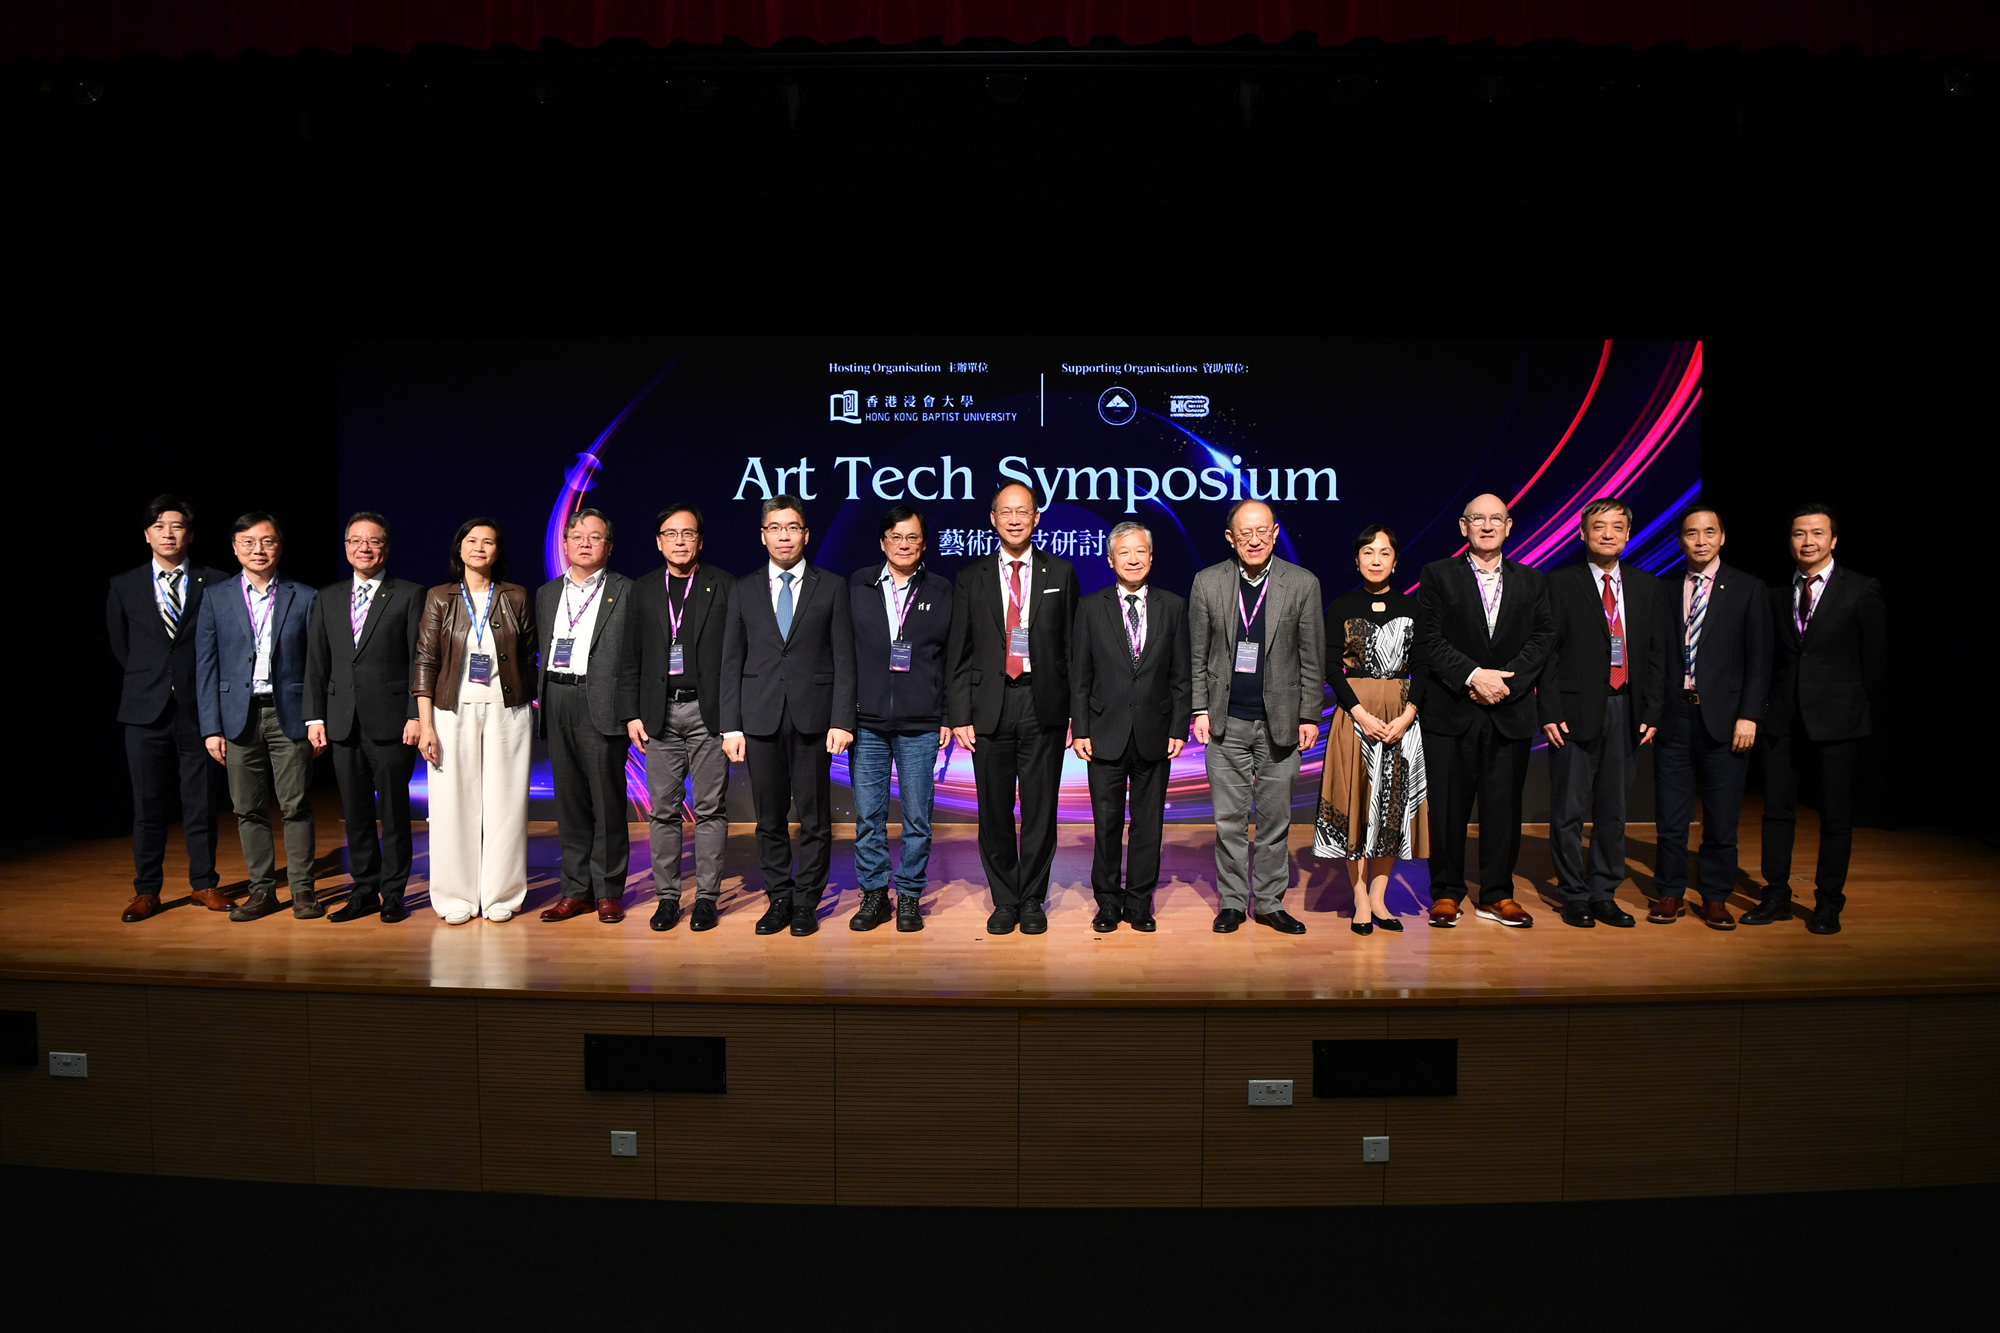 Officiating guests at the Art Tech Symposium